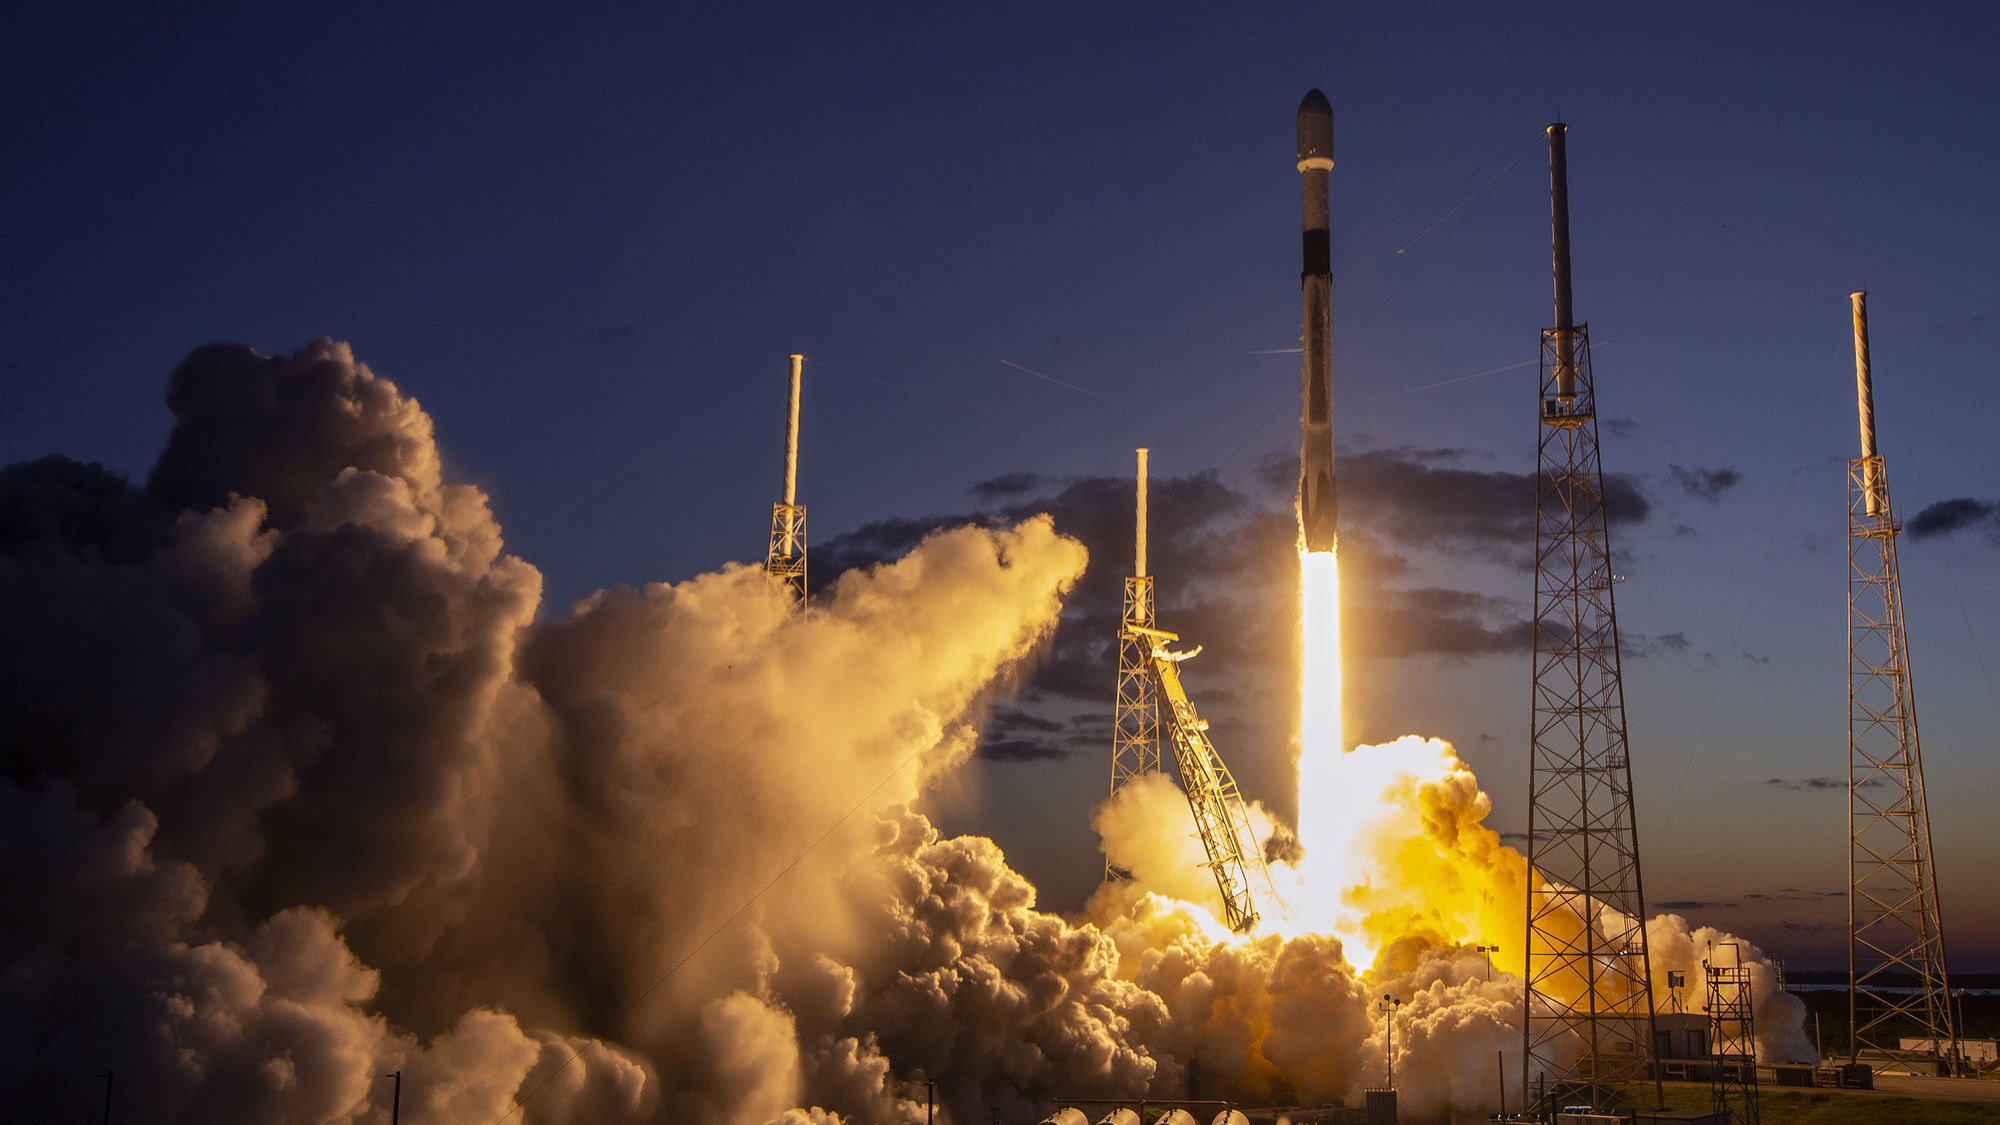 SpaceX rocket lifting off from launchpad at dawn